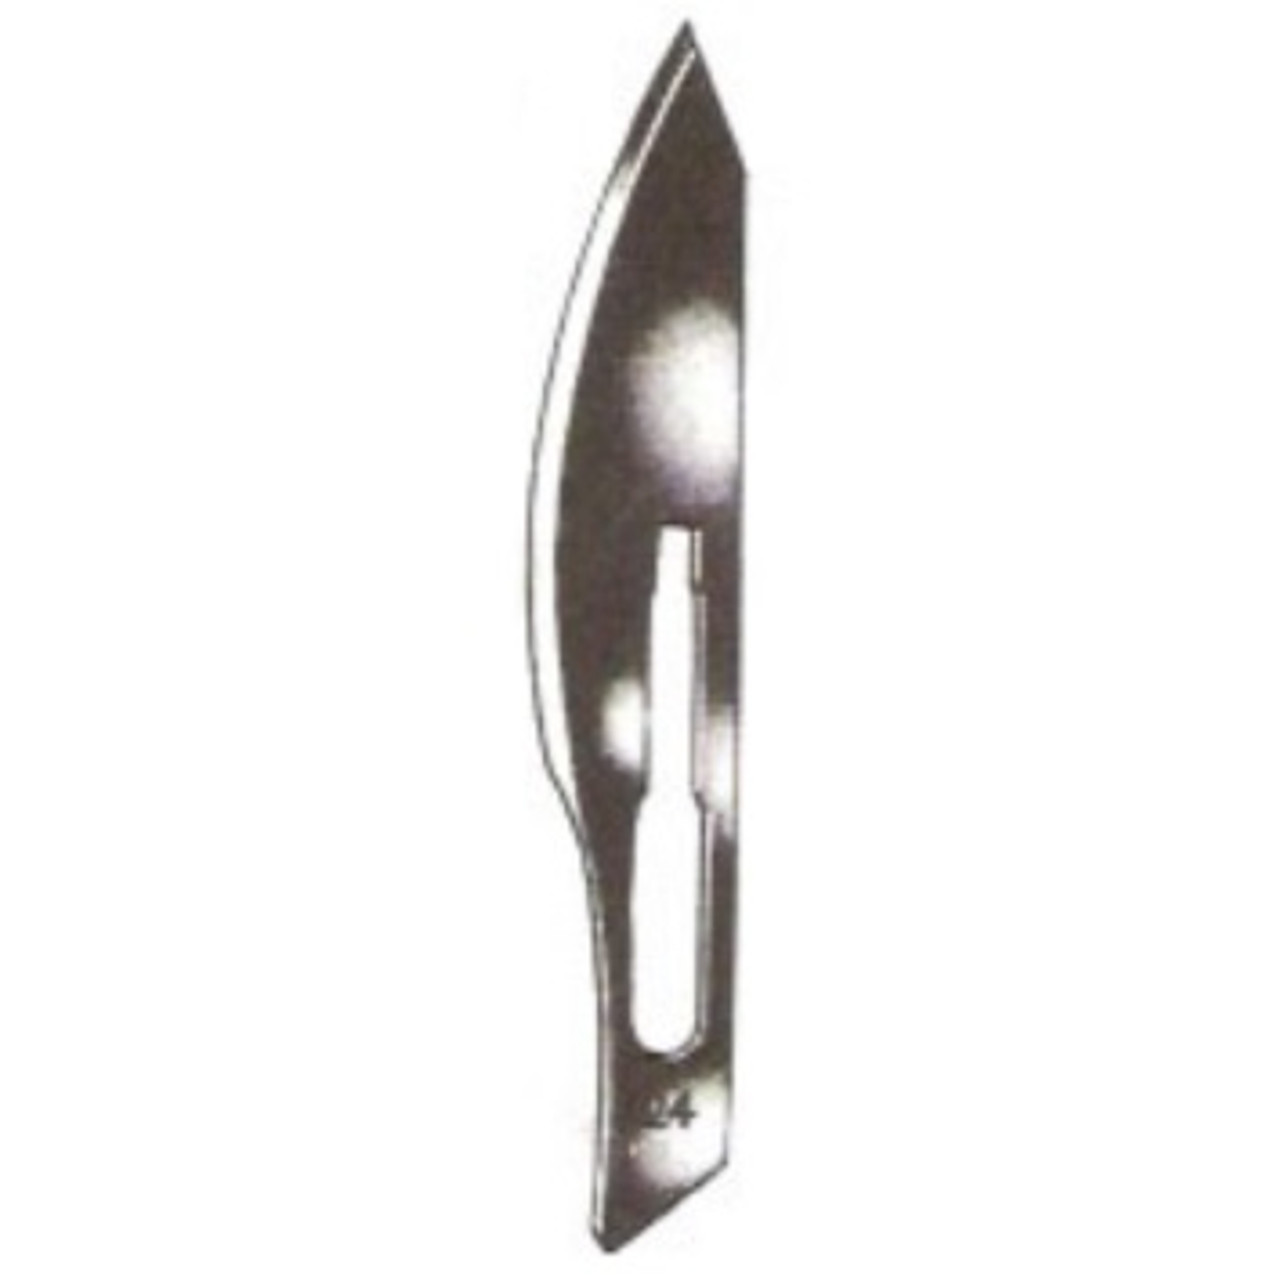 Technocut Surgical Blades – High Quality Medical Instruments